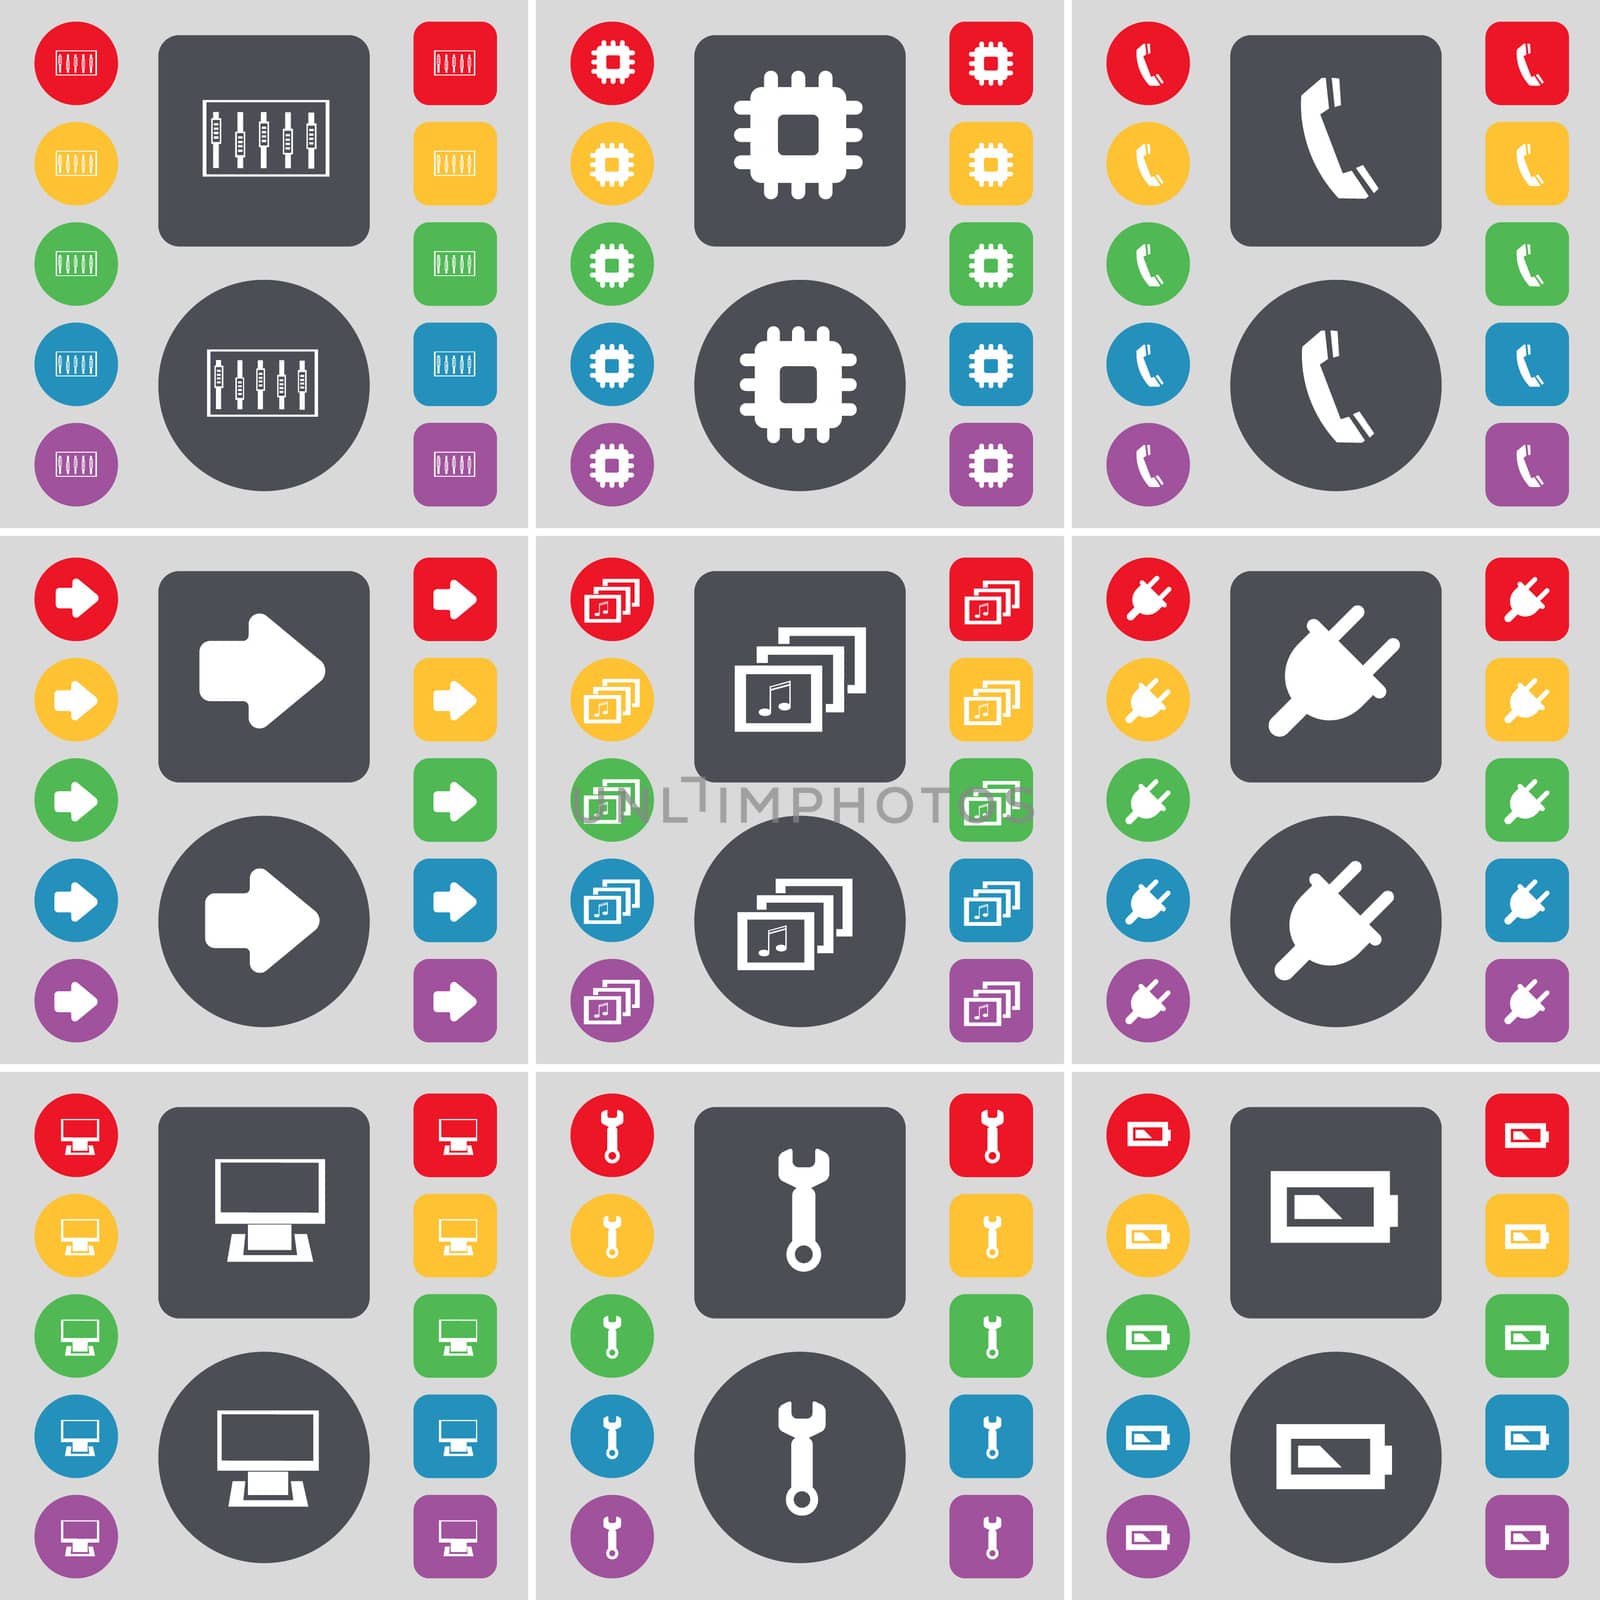 Equalizer, Processor, Receiver, Arrow right, Gallery, Socket, Monitor, Wrench, Battery icon symbol. A large set of flat, colored buttons for your design. illustration